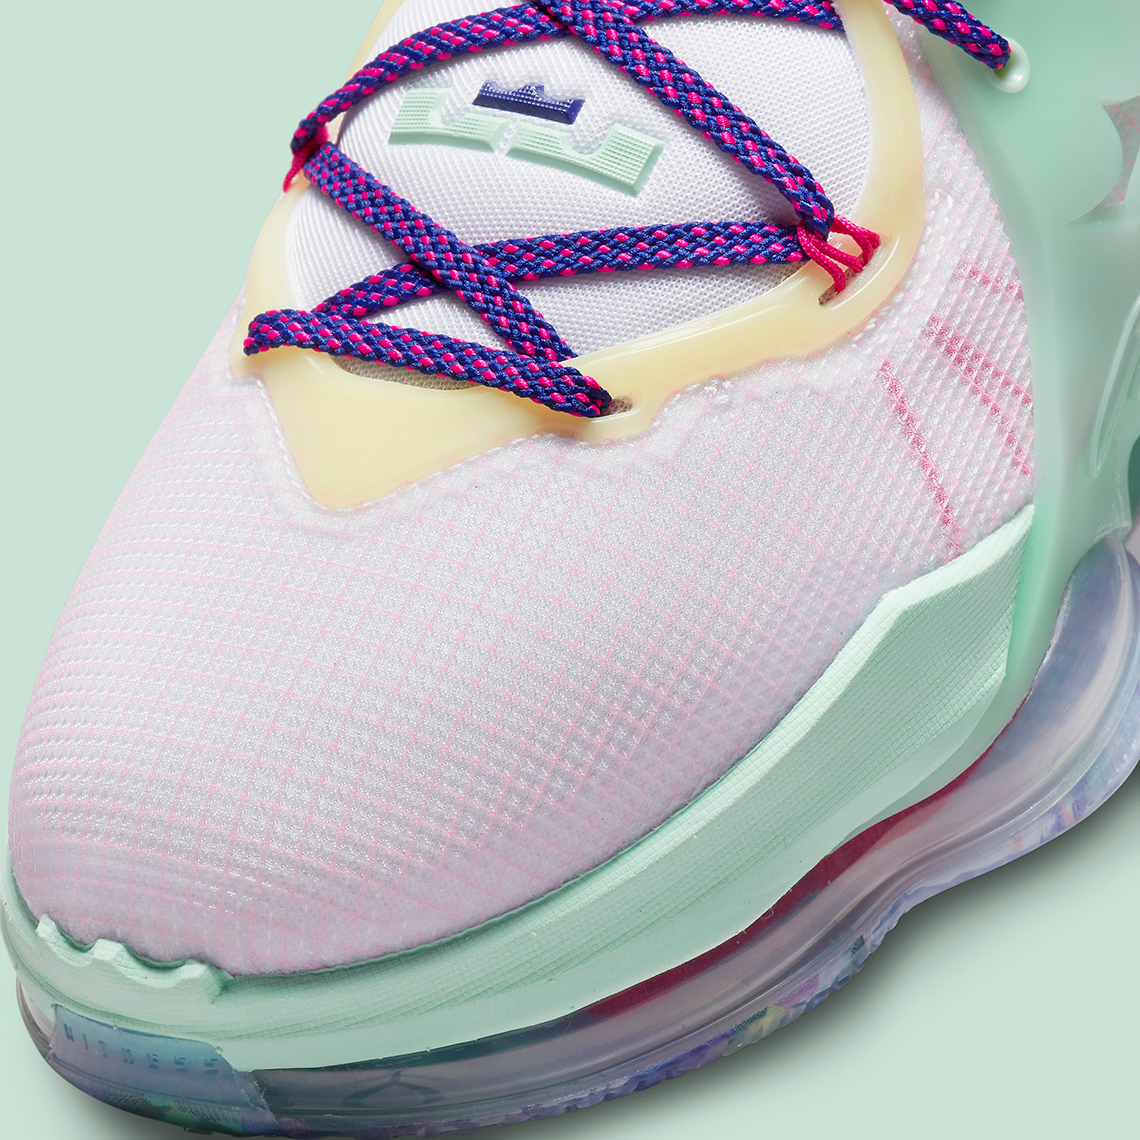 Nike LeBron 19 Valentine's Day DH8460-900 Release Date | SneakerNews.com